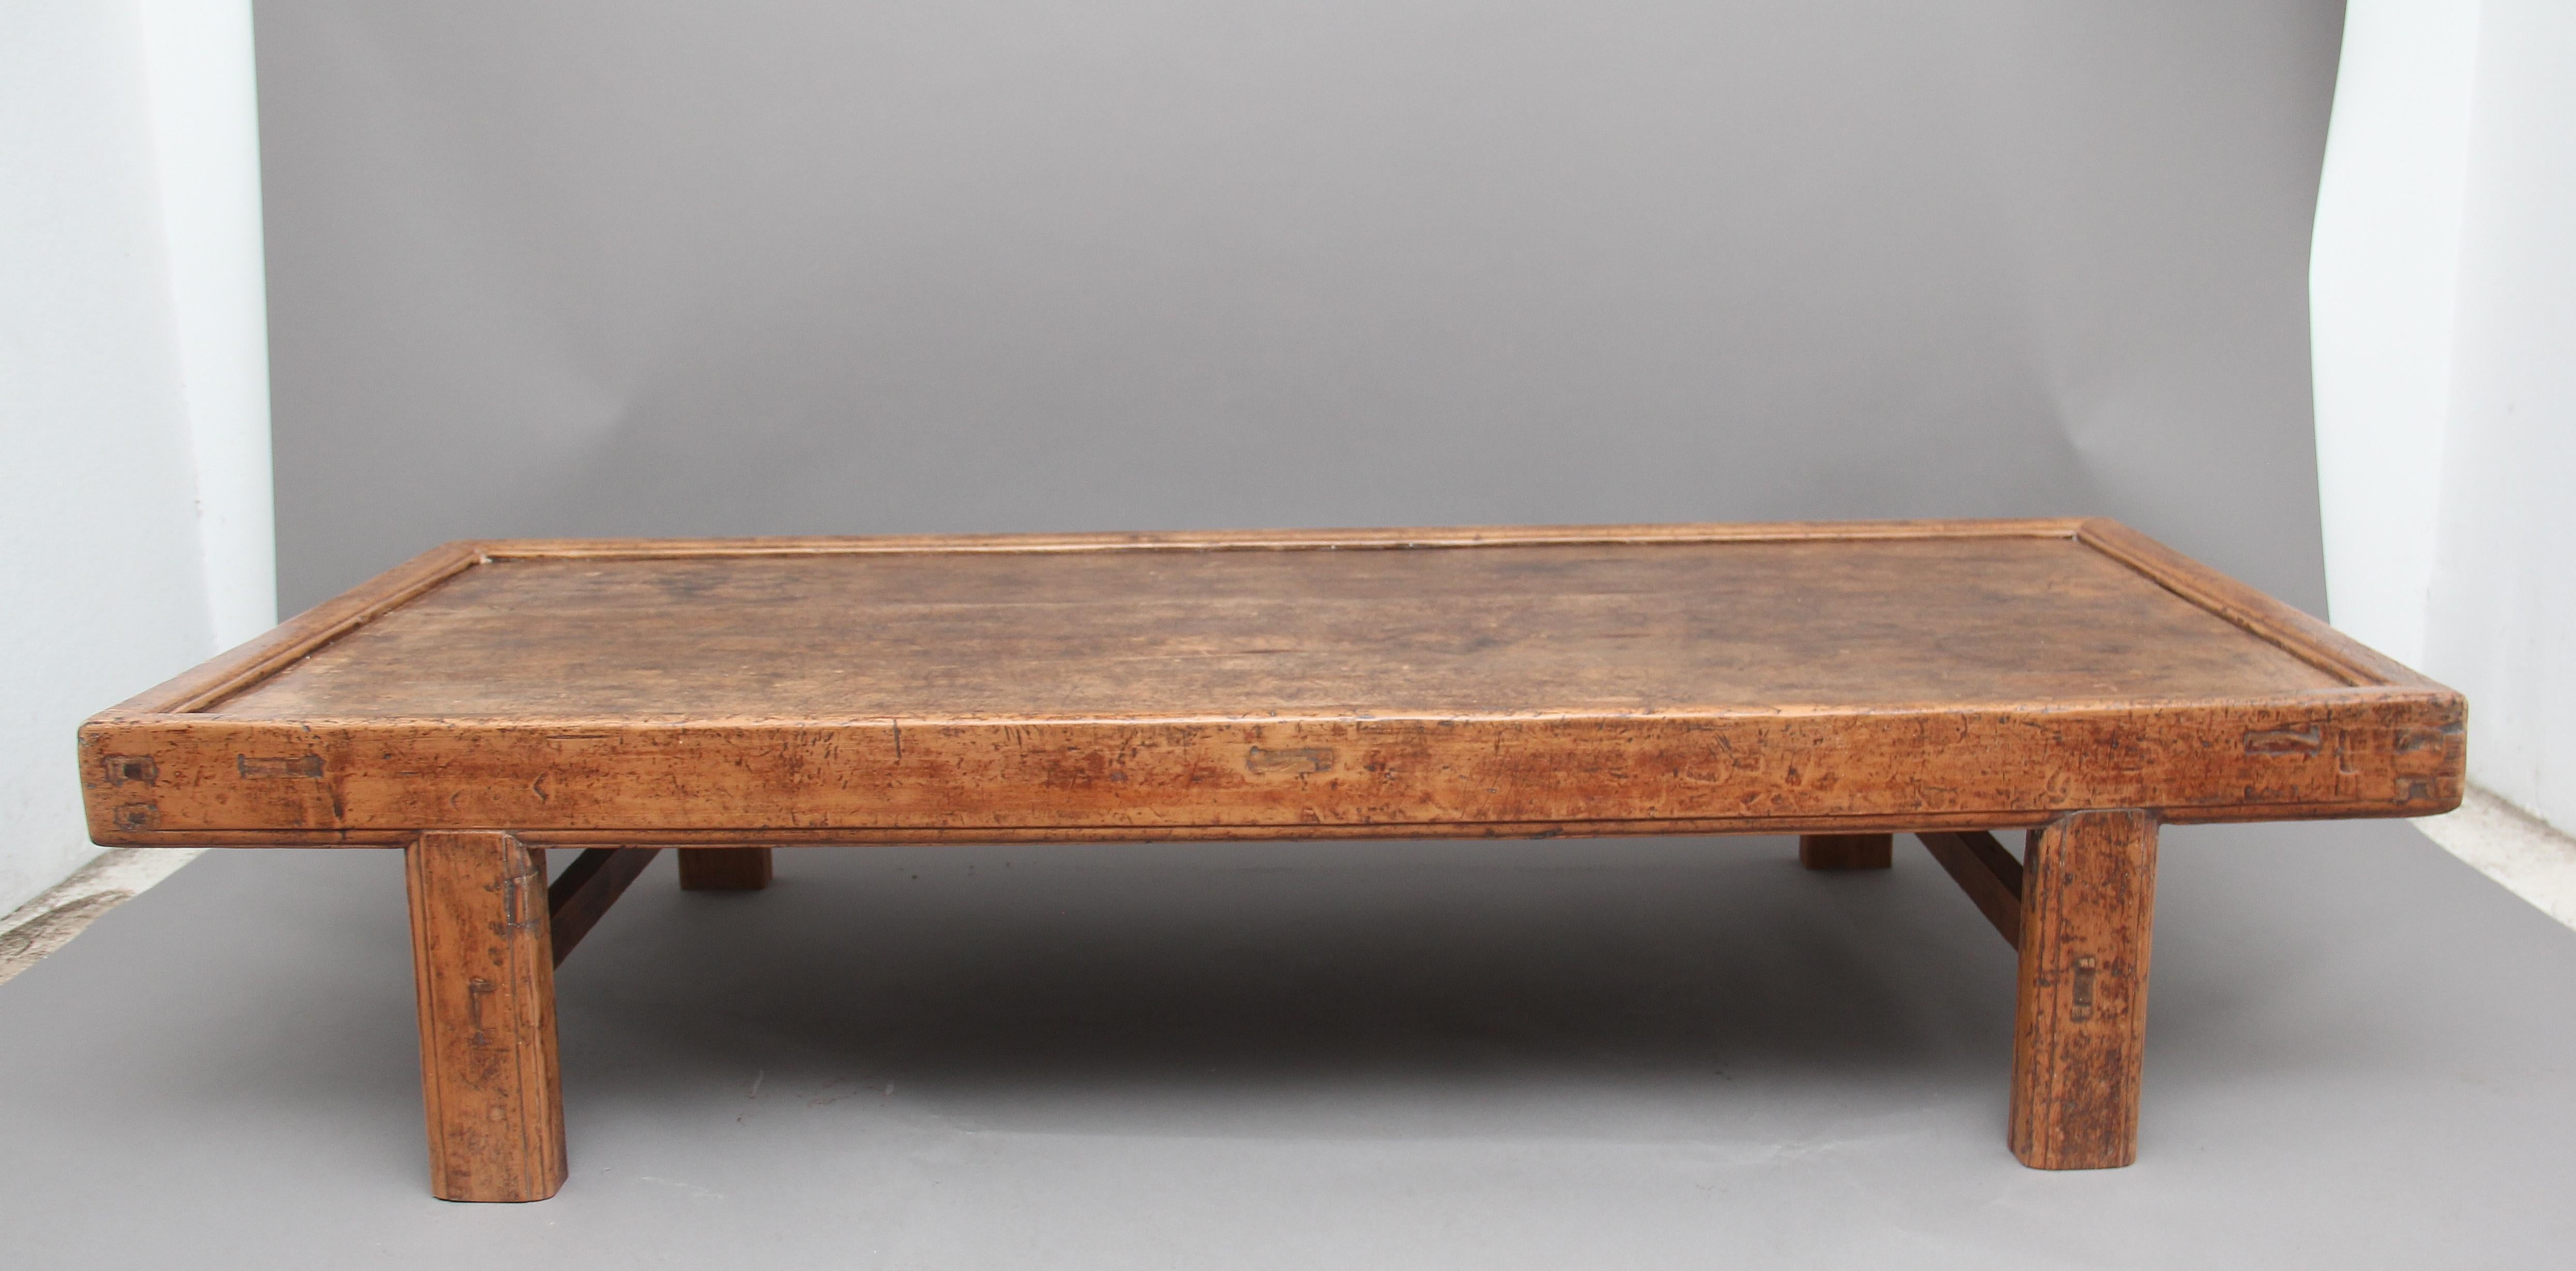 19th century Chinese bed / coffee table in a rustic style, the recessed top with a molded edge supported on chunky square legs united with side stretchers, the table has a lovely color, in great condition and ideal for use as a large coffee table,